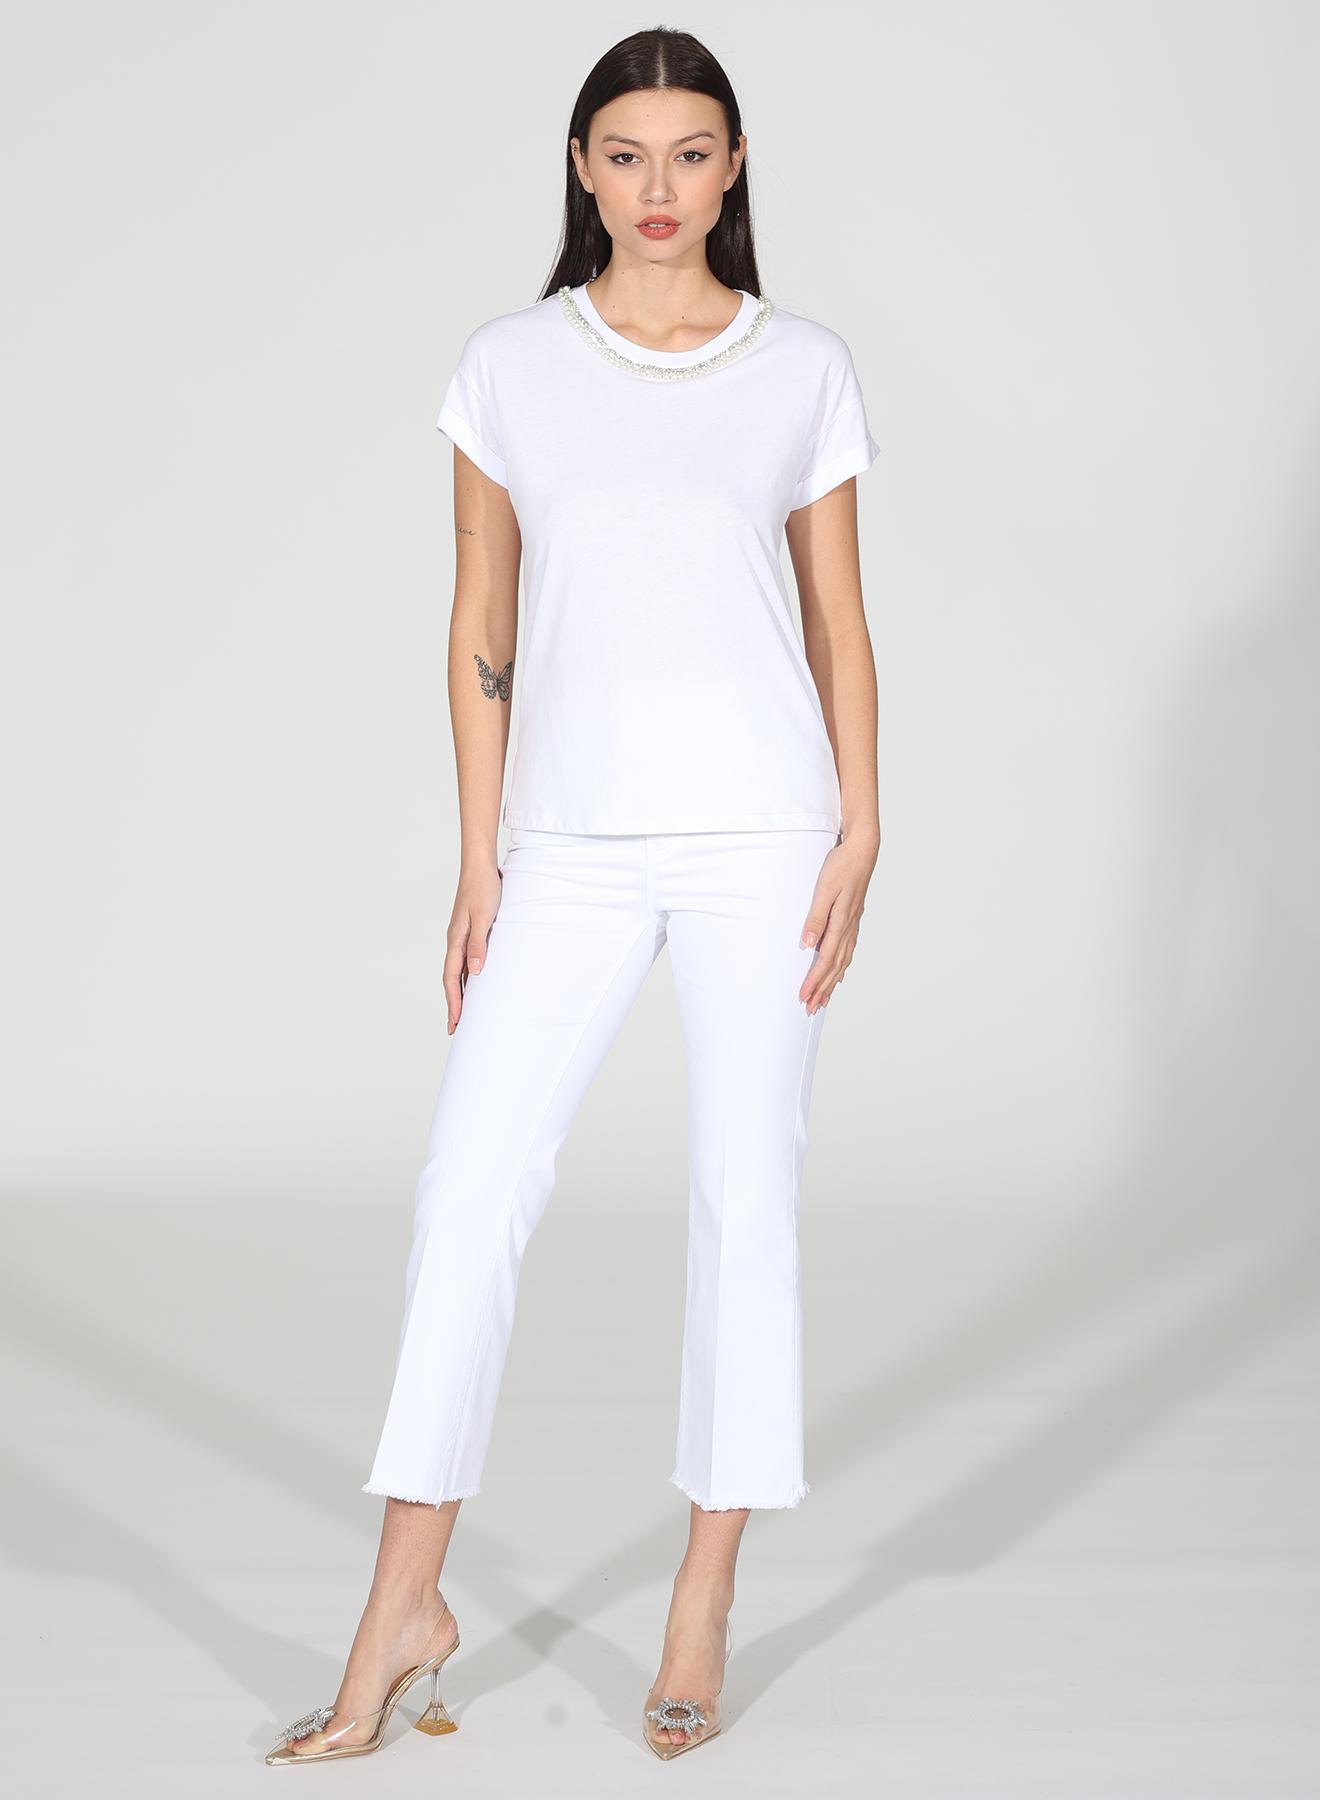 White T-shirt with rhinestones and pearls R.R. - 1